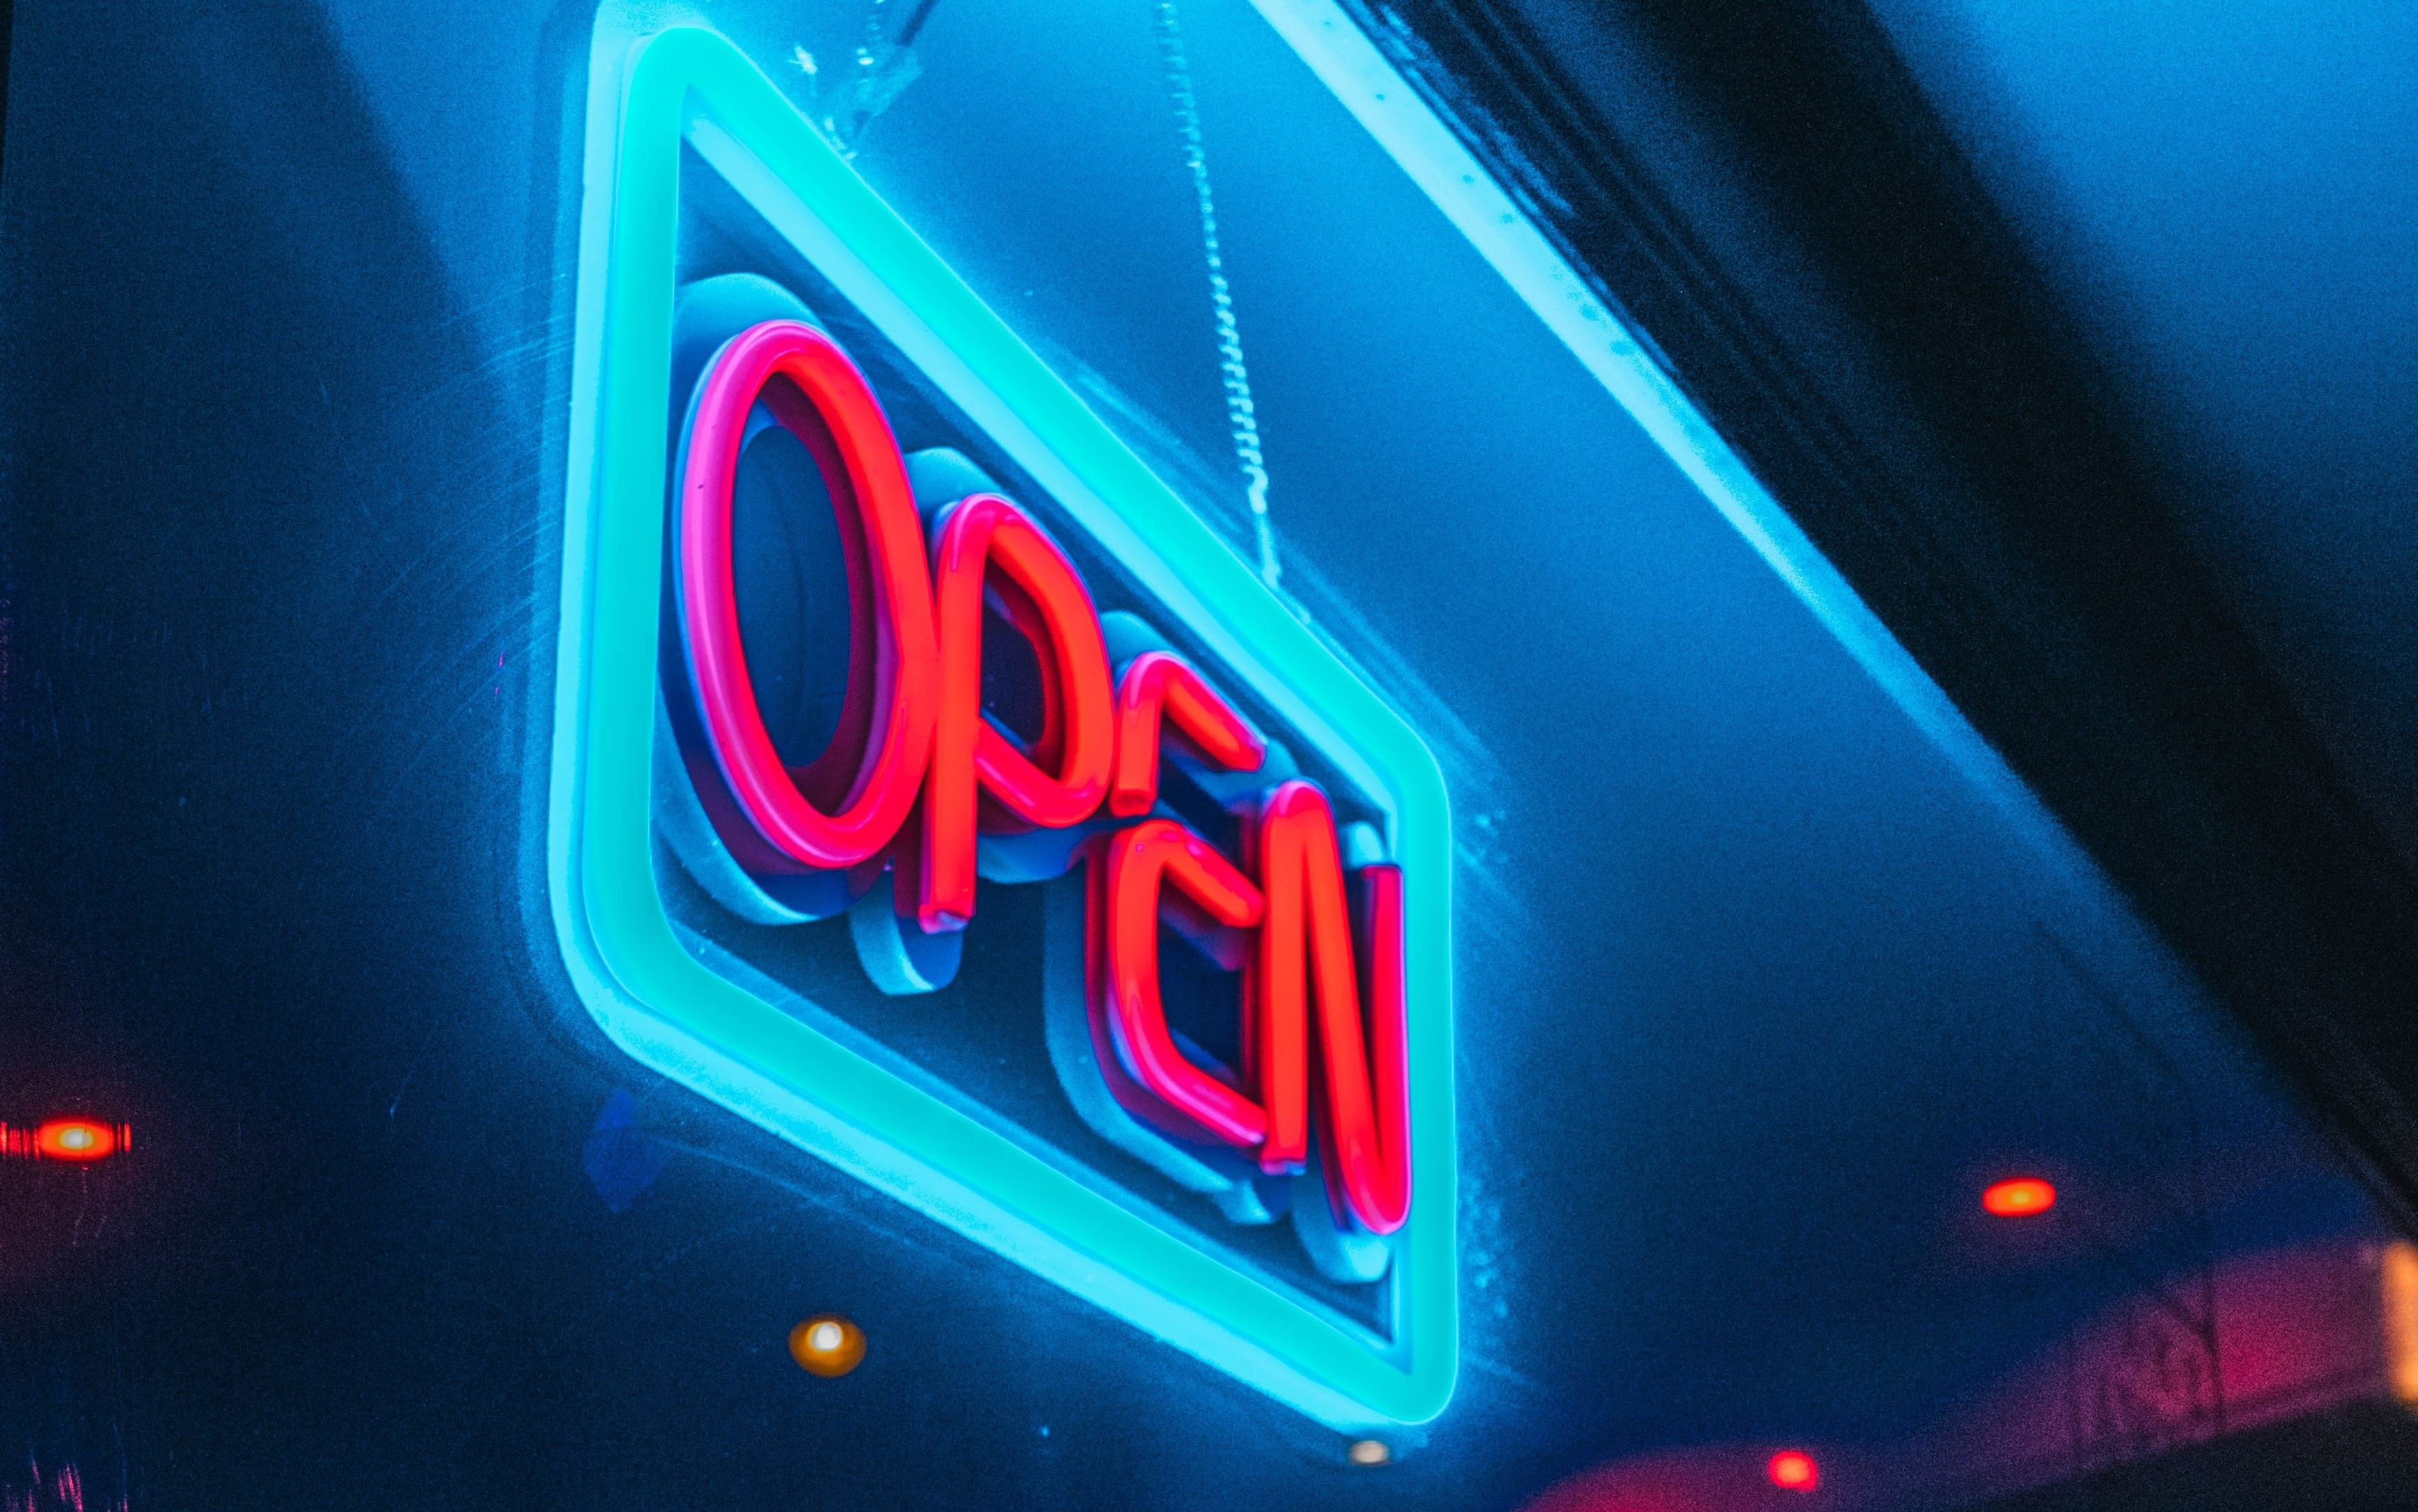 Neon Open Sign Hanging in a Bar Window